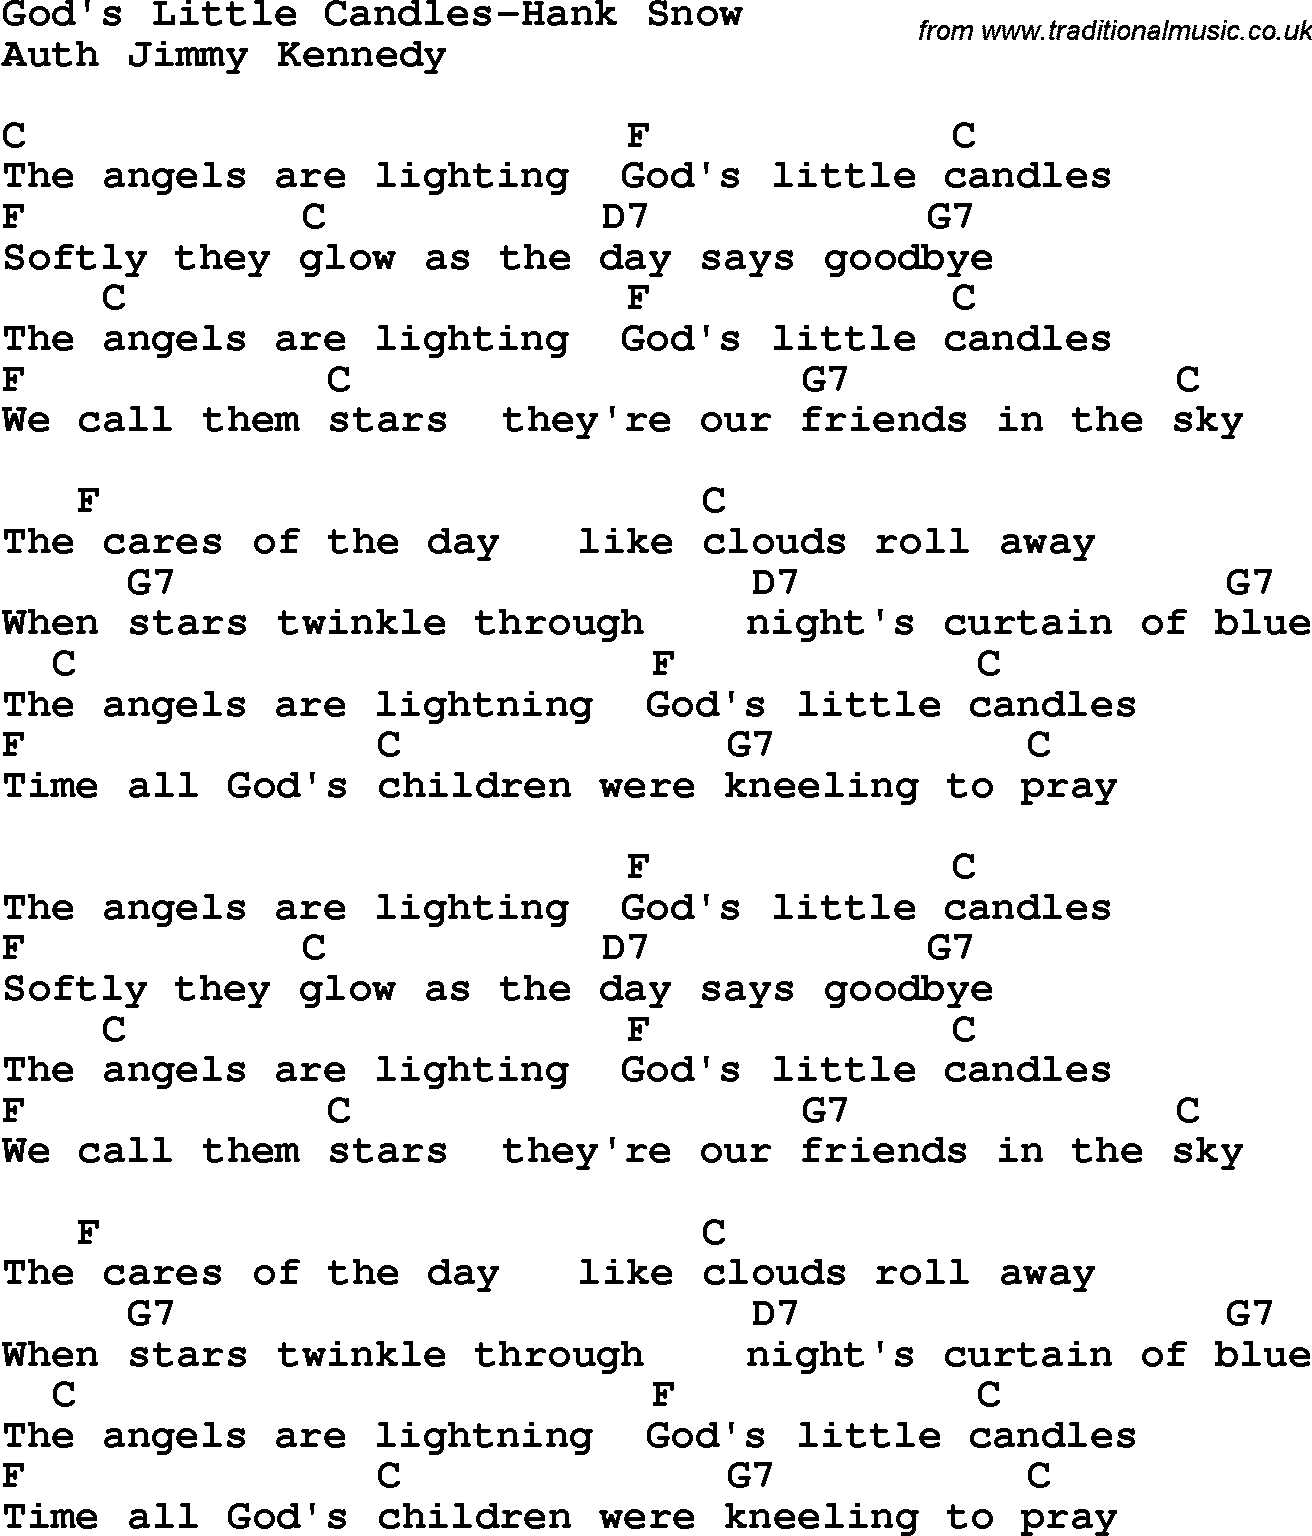 Country, Southern and Bluegrass Gospel Song God's Little Candles-Hank Snow lyrics and chords